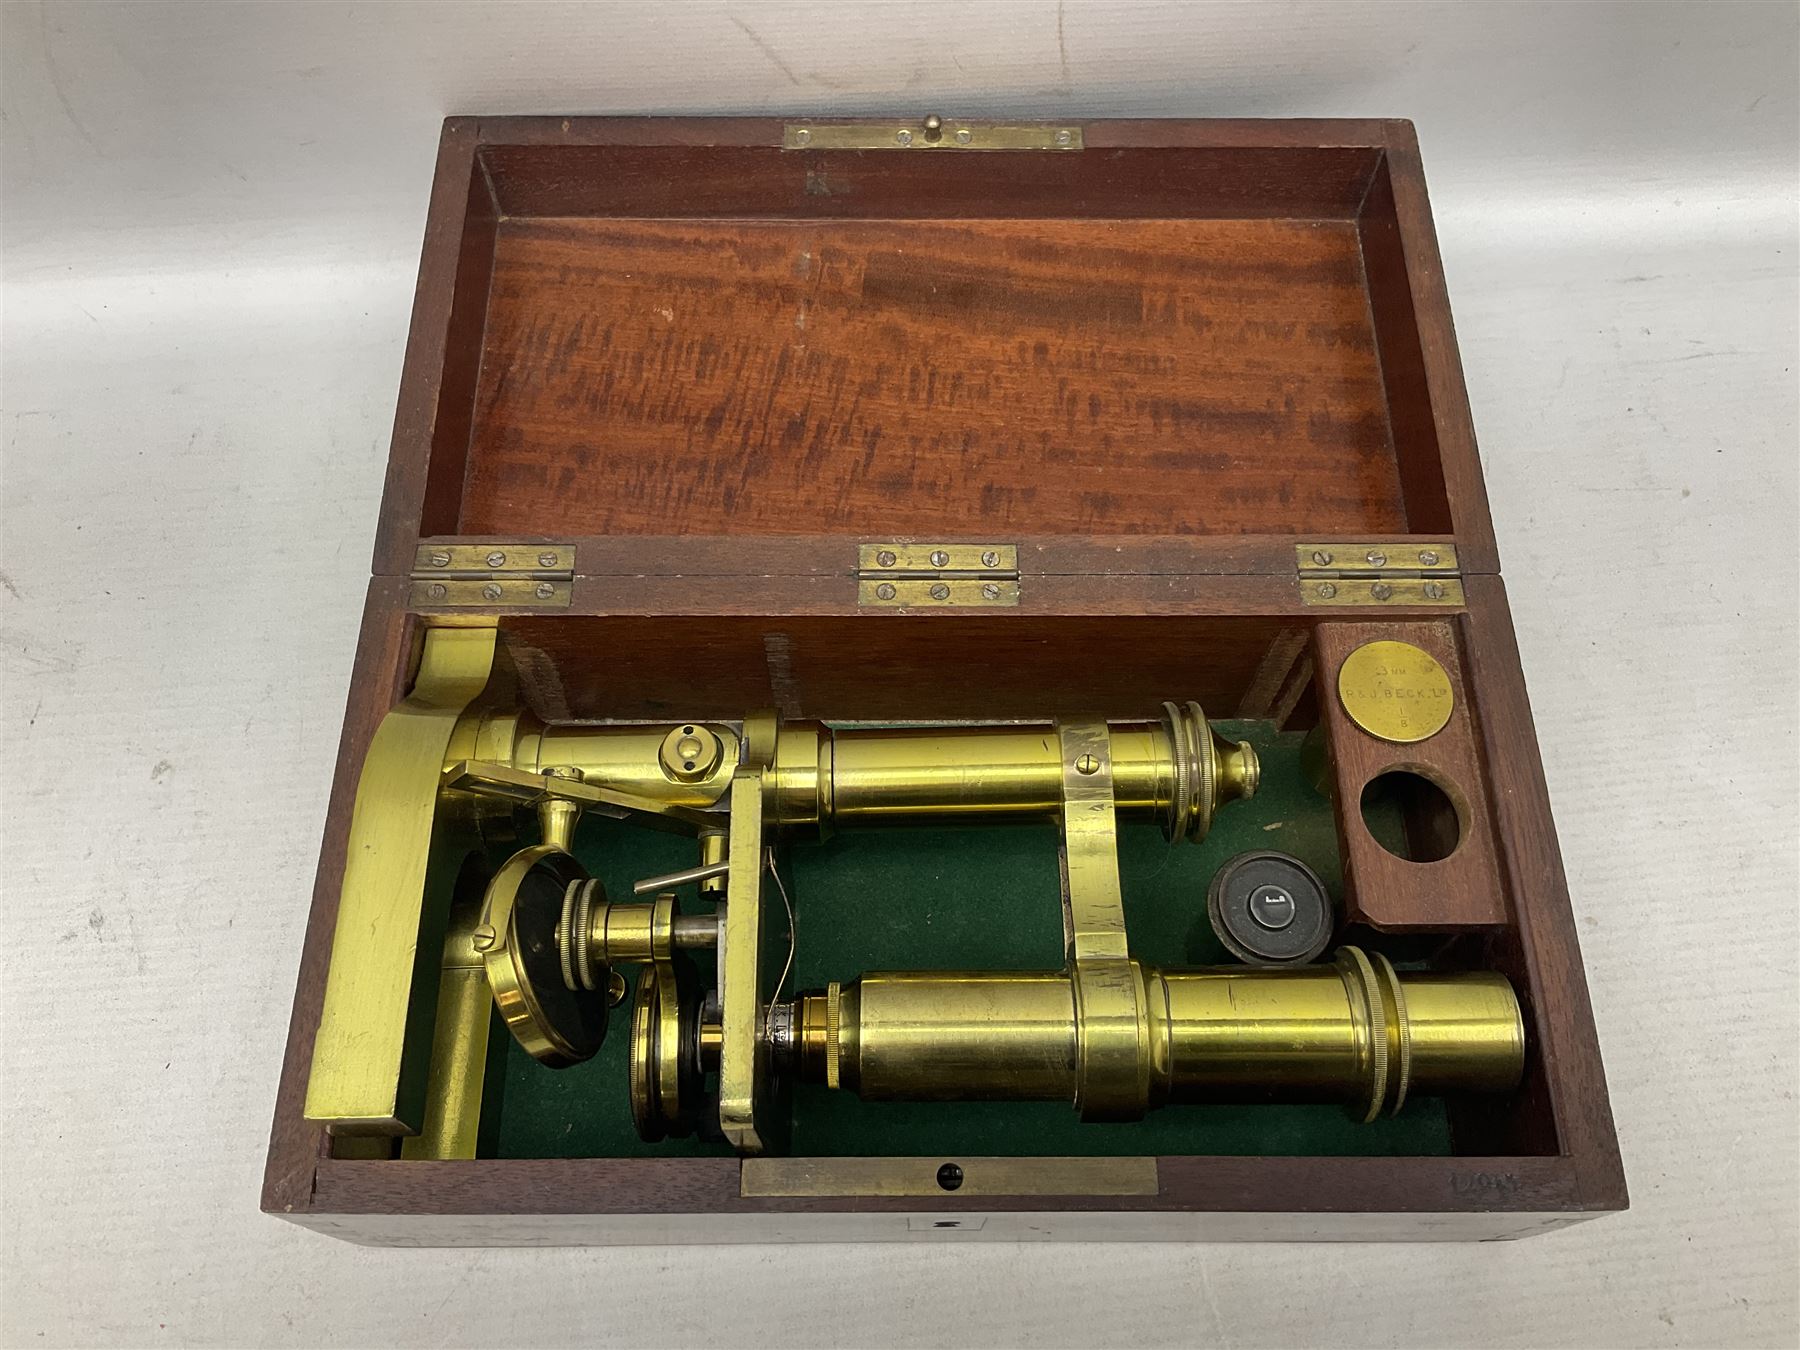 19th century brass monocular microscope by R. & J. Beck London No.18760 with hinged column and pitch - Image 10 of 12